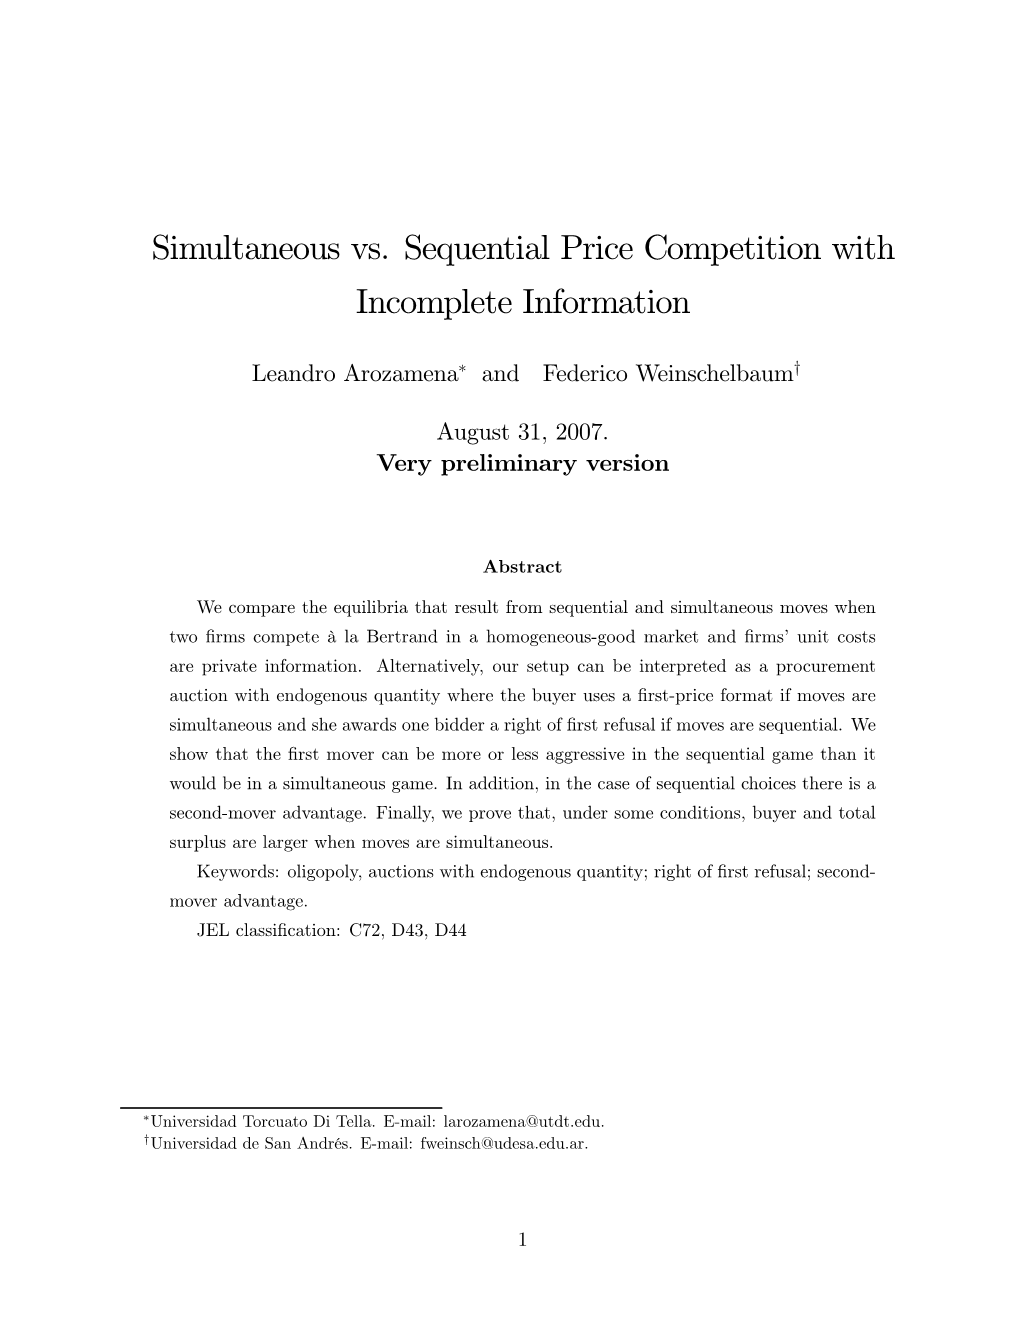 Simultaneous Vs. Sequential Price Competition with Incomplete Information